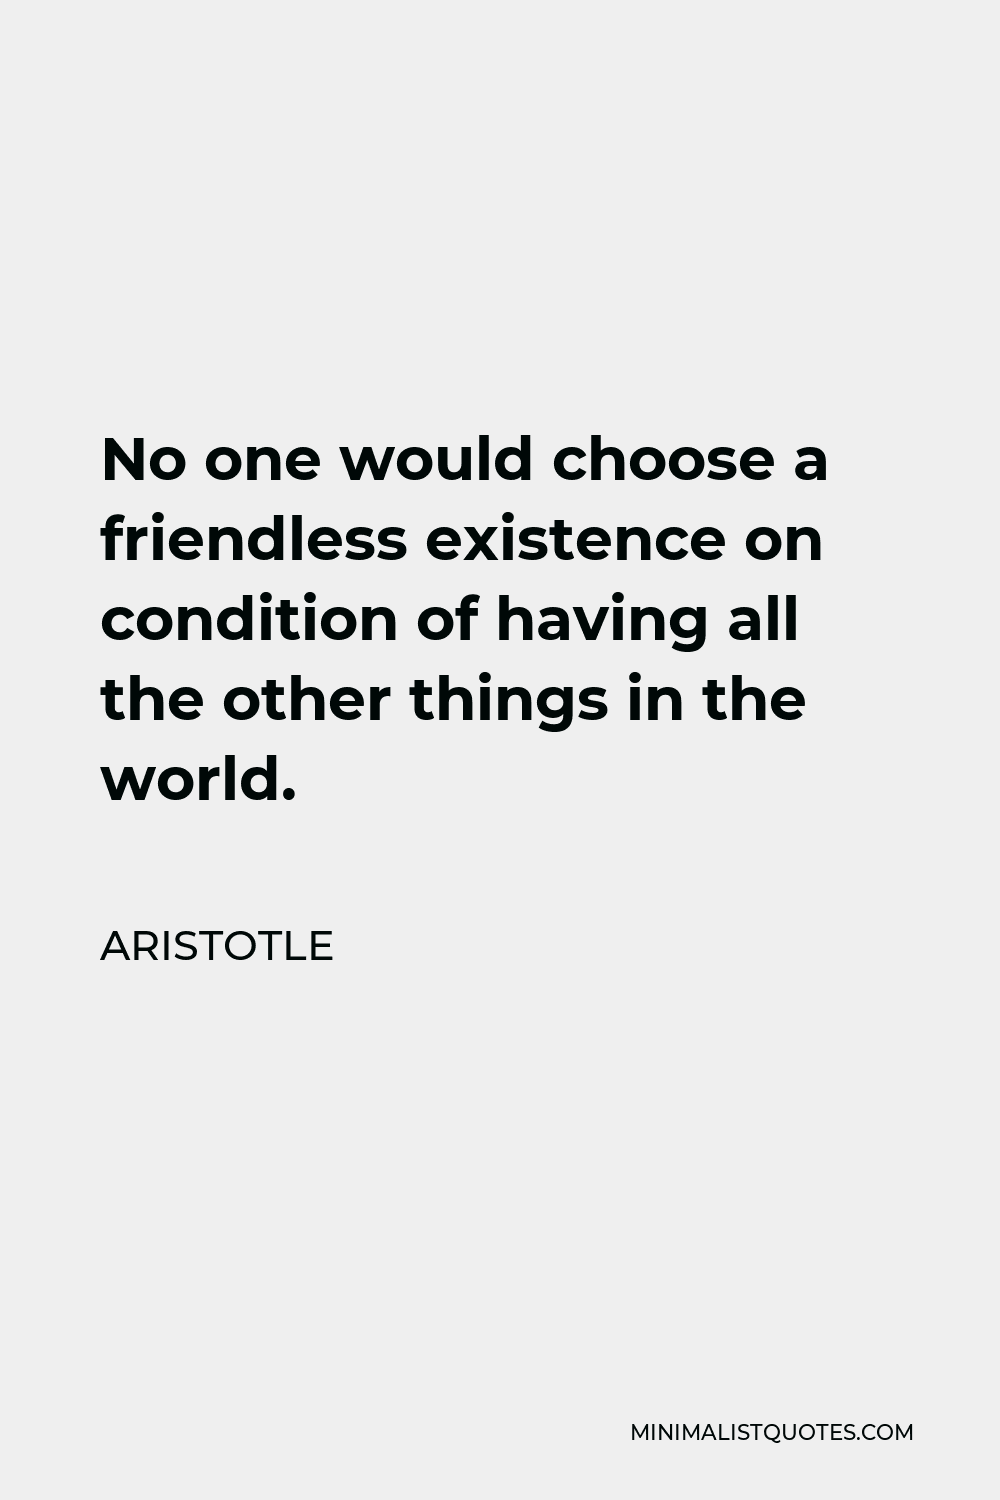 Aristotle Quote - No one would choose a friendless existence on condition of having all the other things in the world.